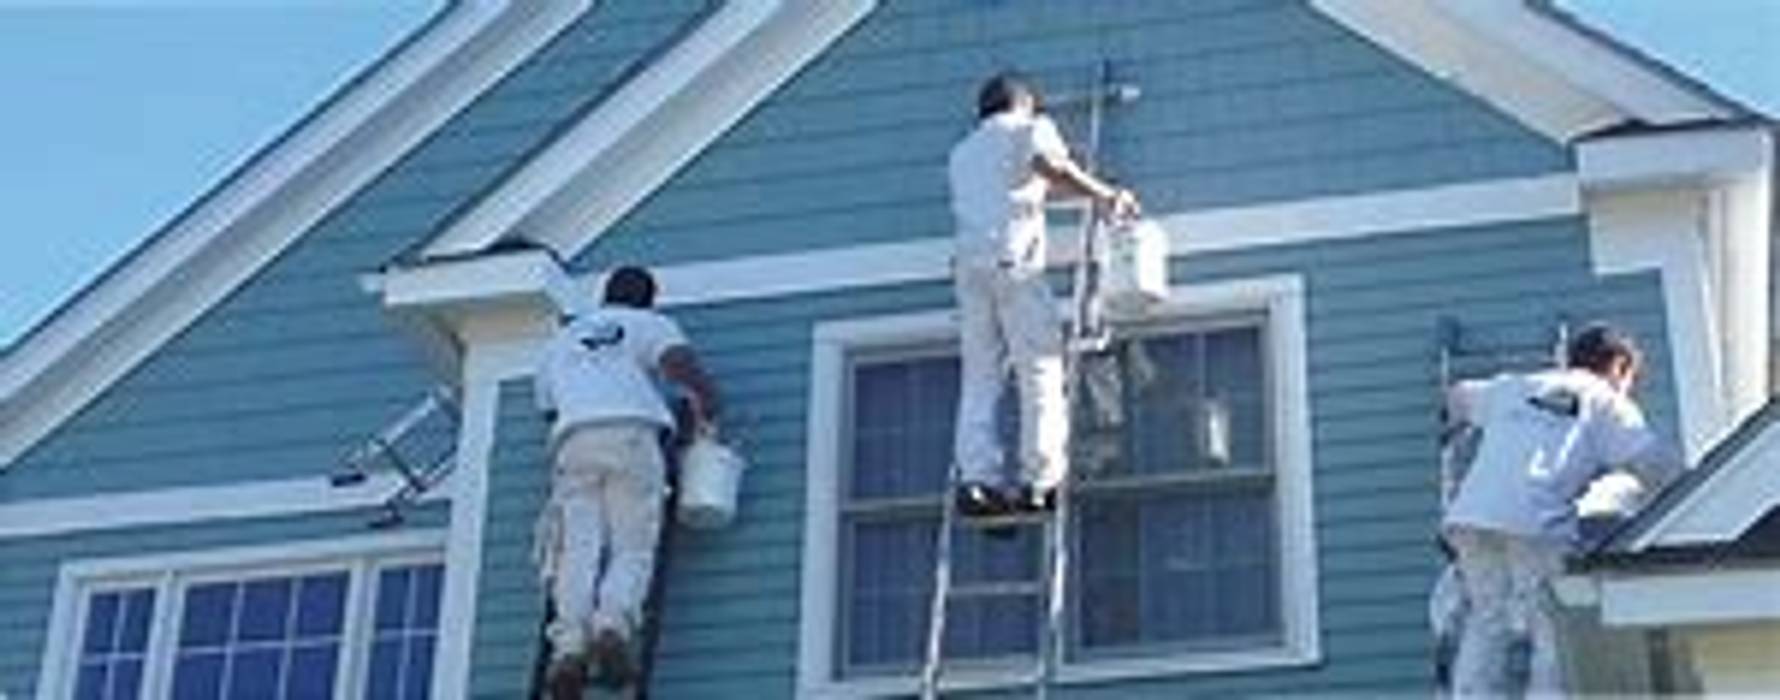 House painting Project SMG trading Enterprise roof painting,commercial painting